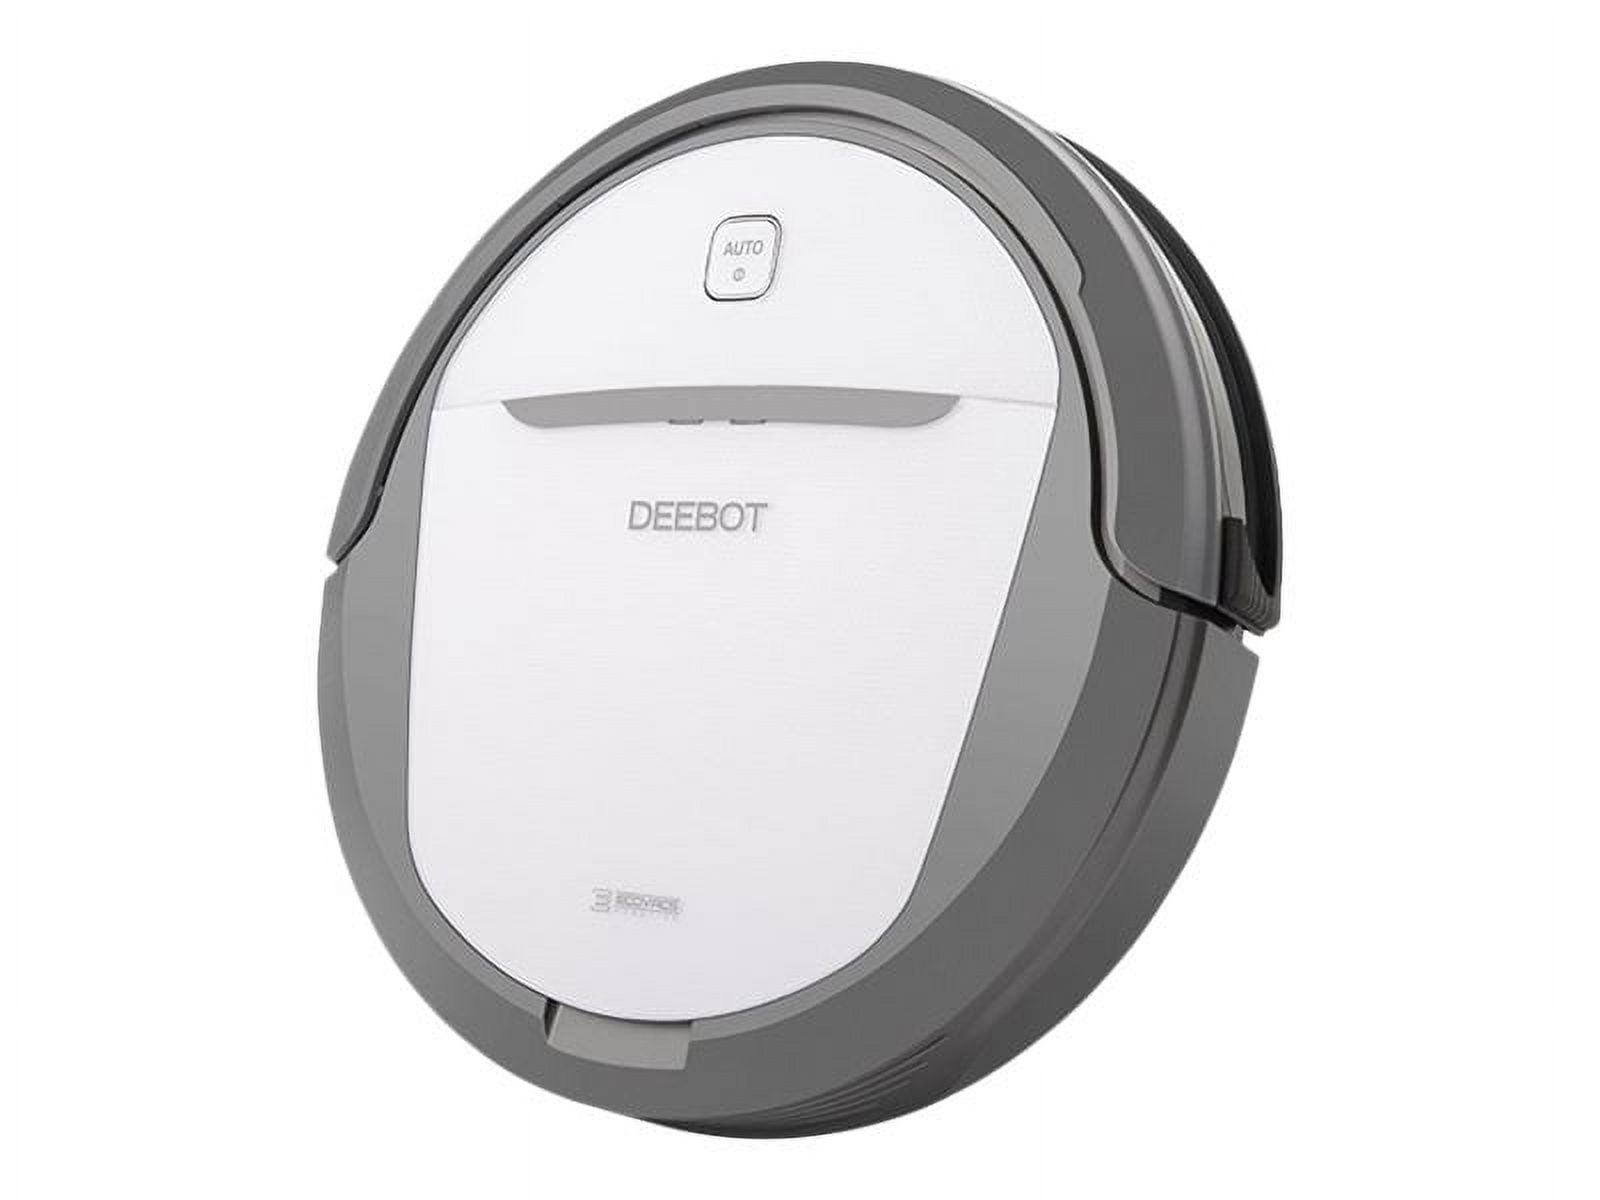 Ecovacs Deebot M81 Pro Review: A Good Robovac You Can Afford